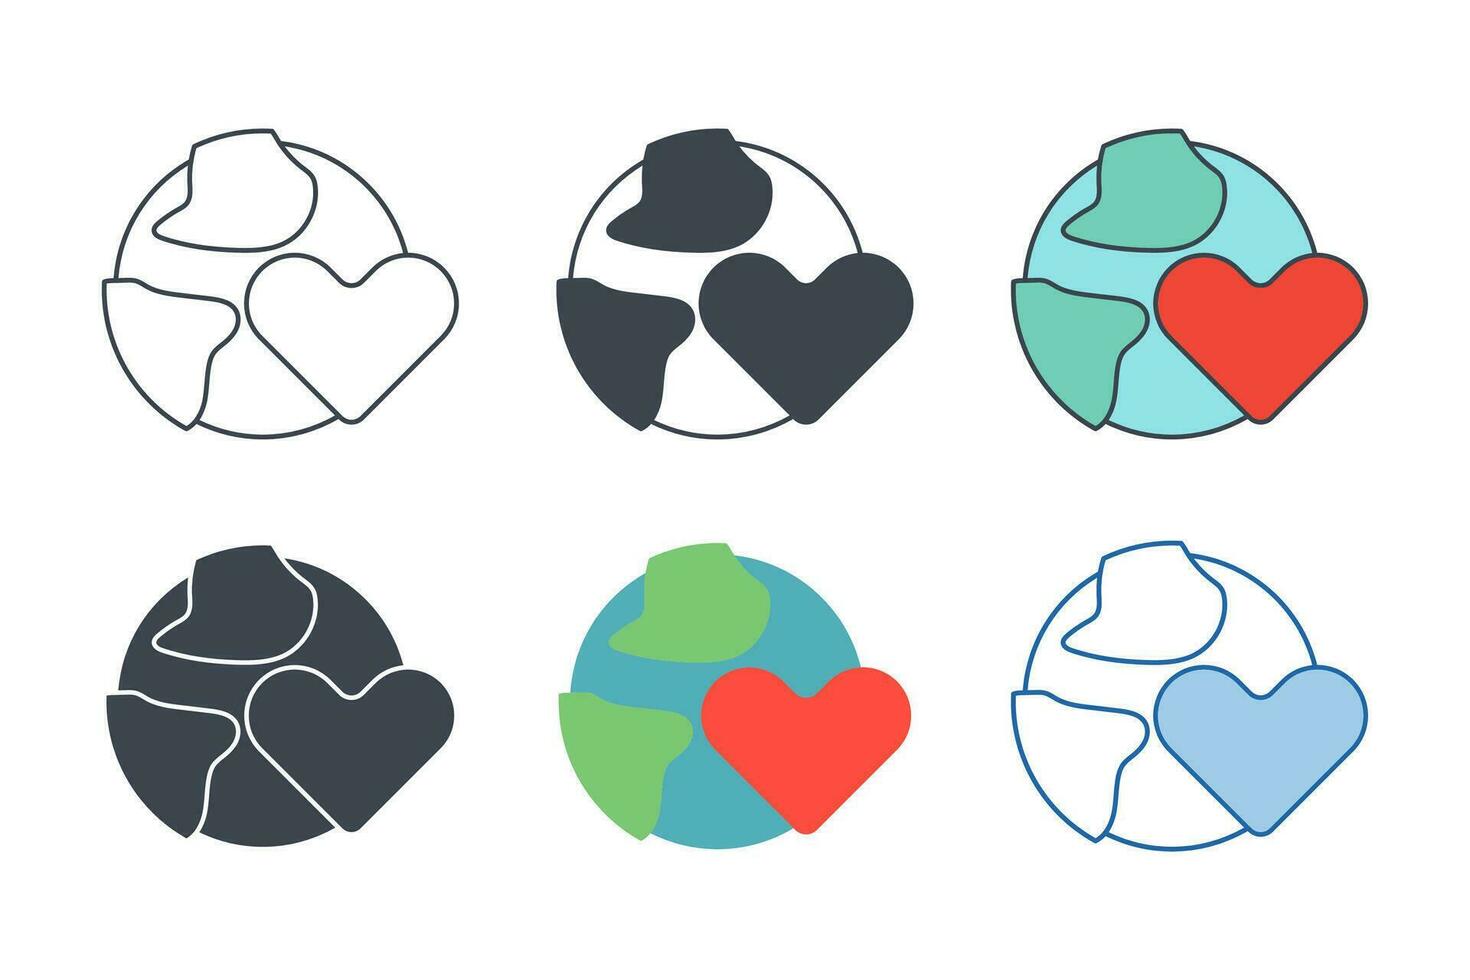 Globe with Heart icon collection with different styles. Earth Love icon symbol vector illustration isolated on white background